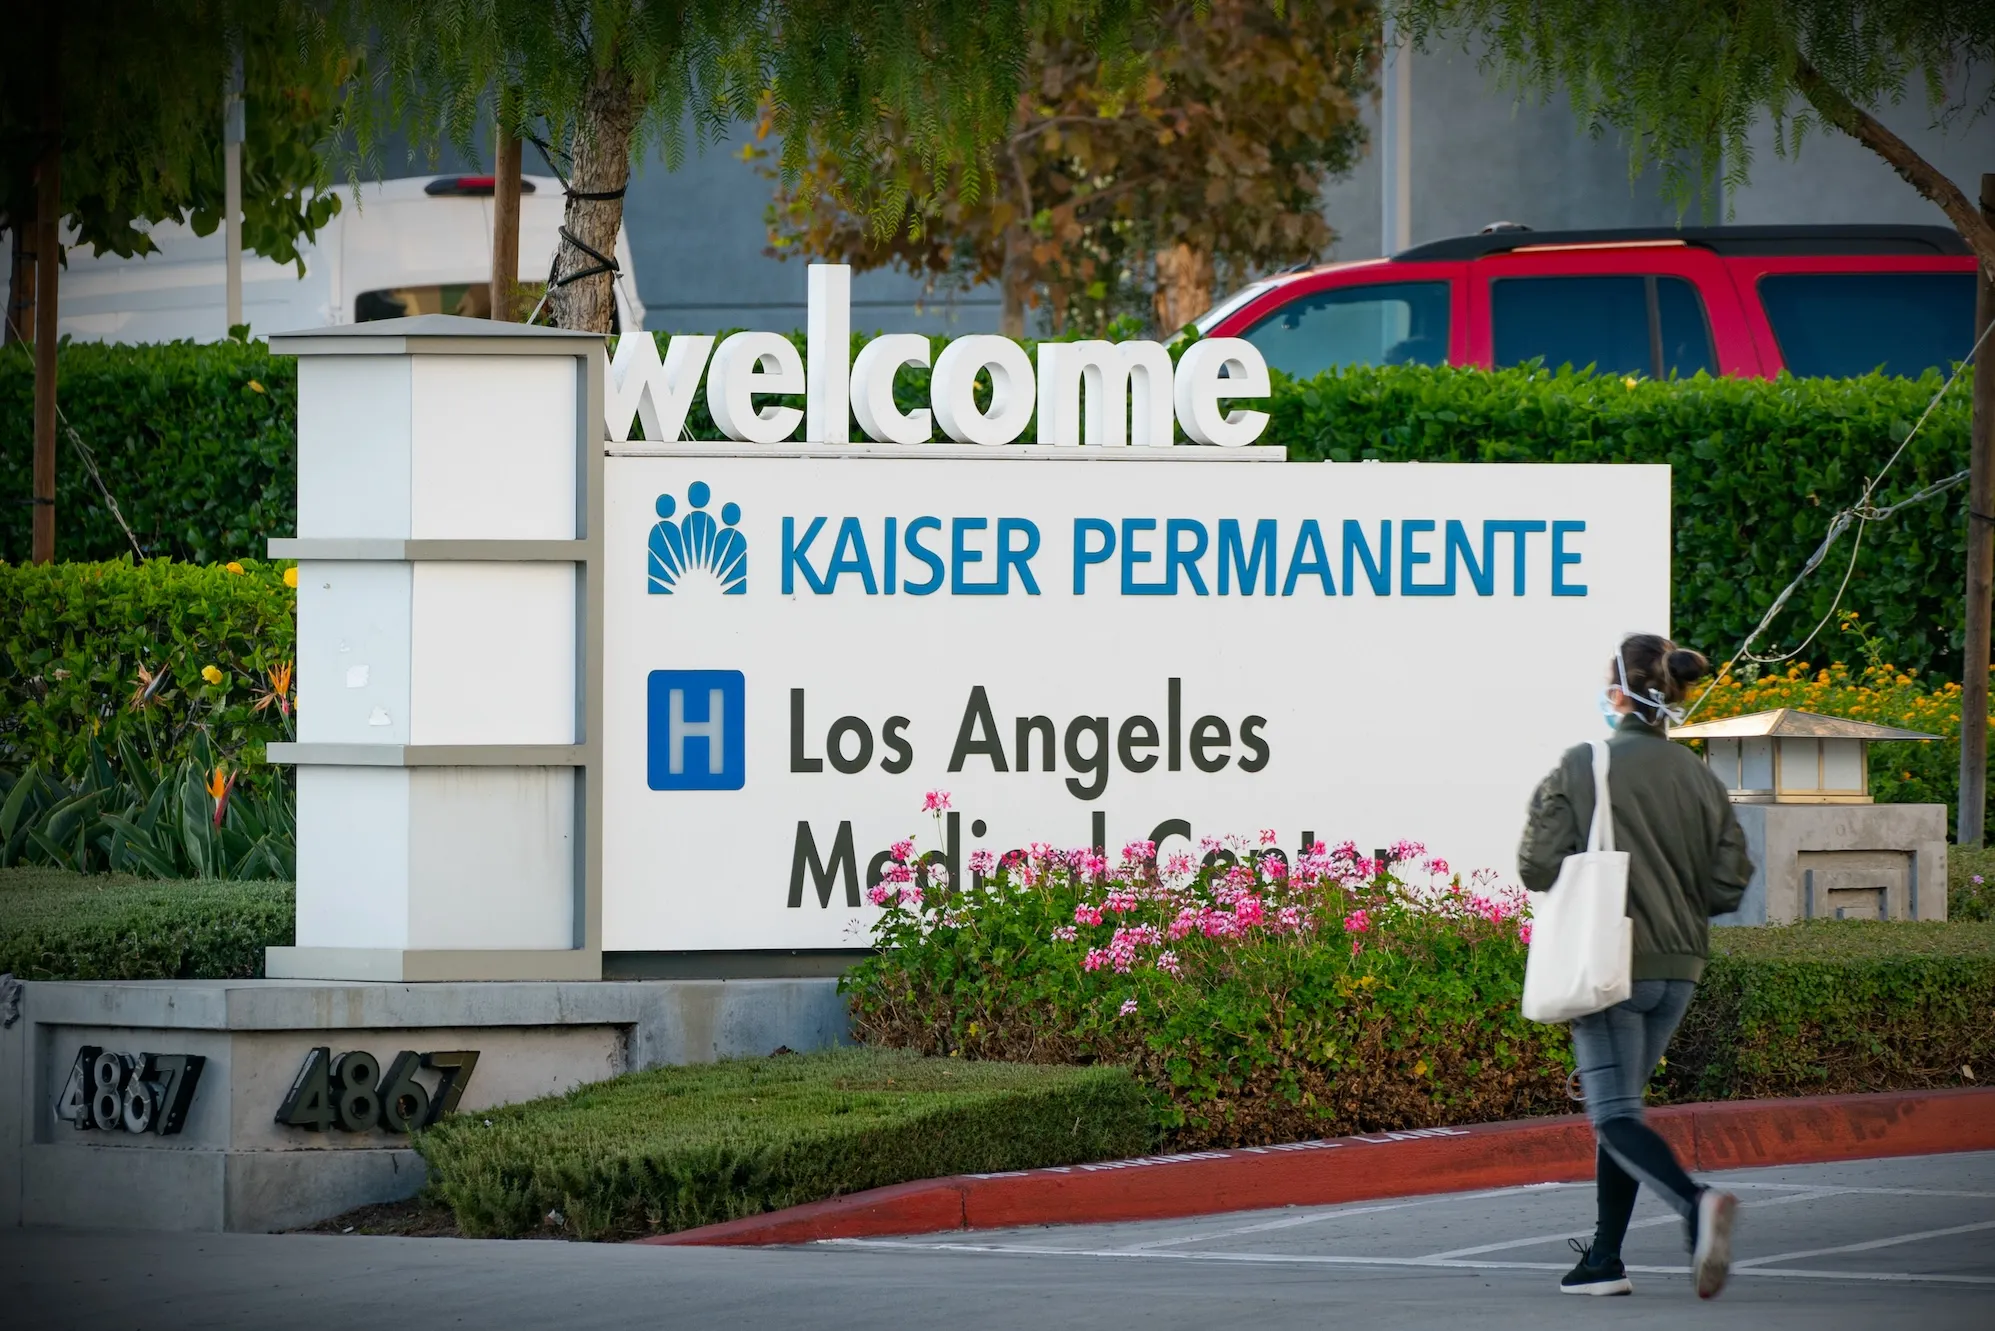 Kaiser Permanente Faces Backlash Over Data Breach Involving Millions of Patients